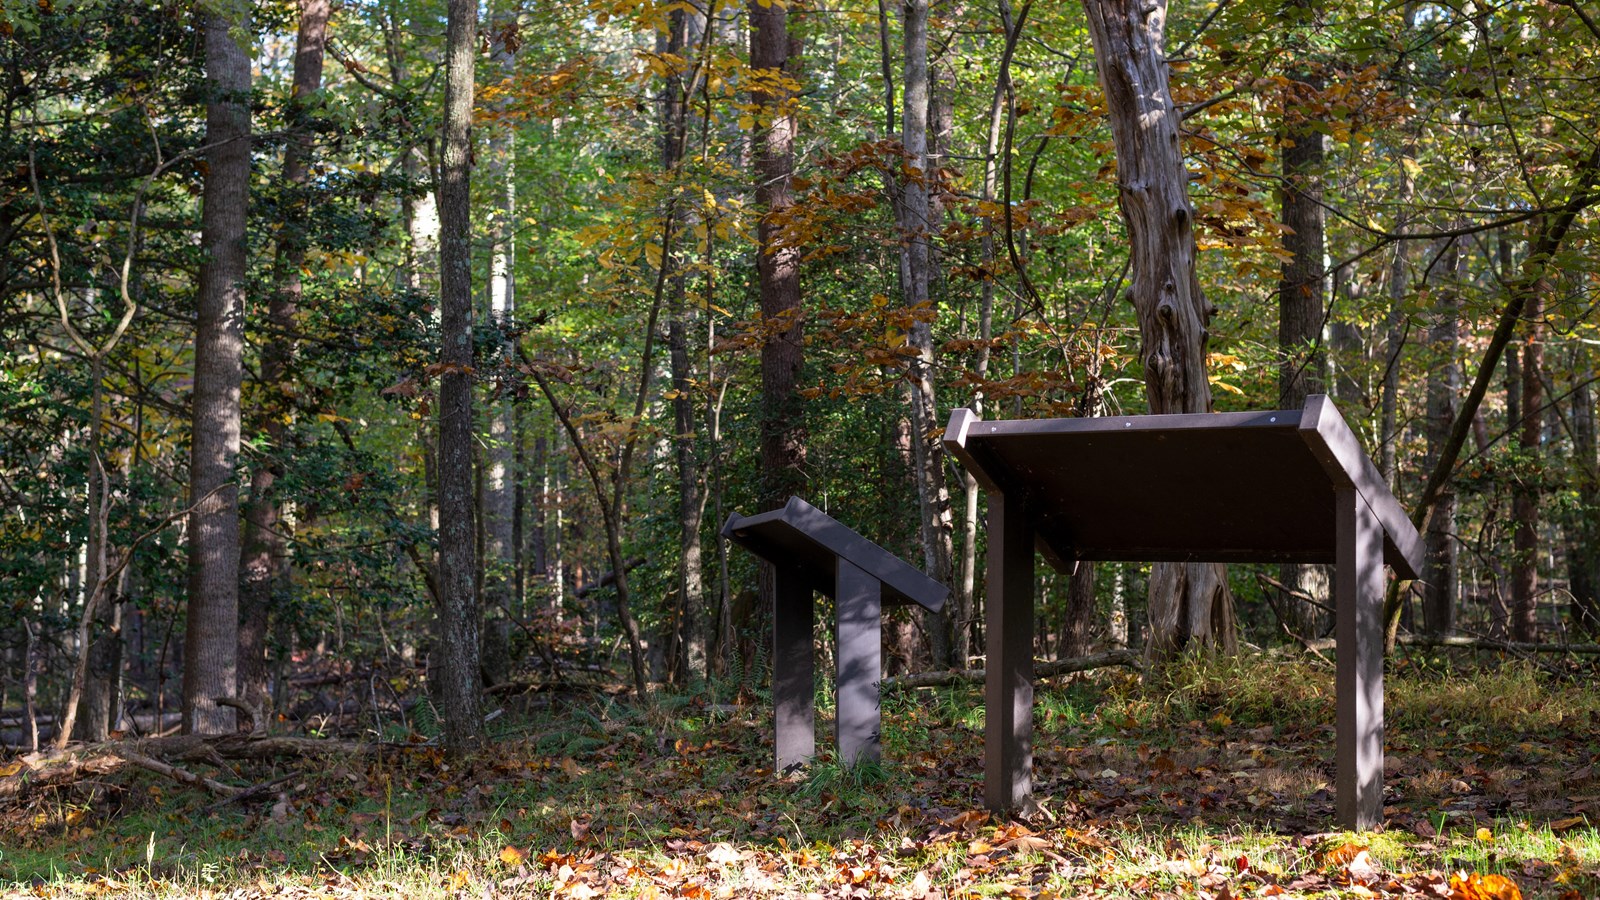 Two low-profile waysides in the woods during fall.